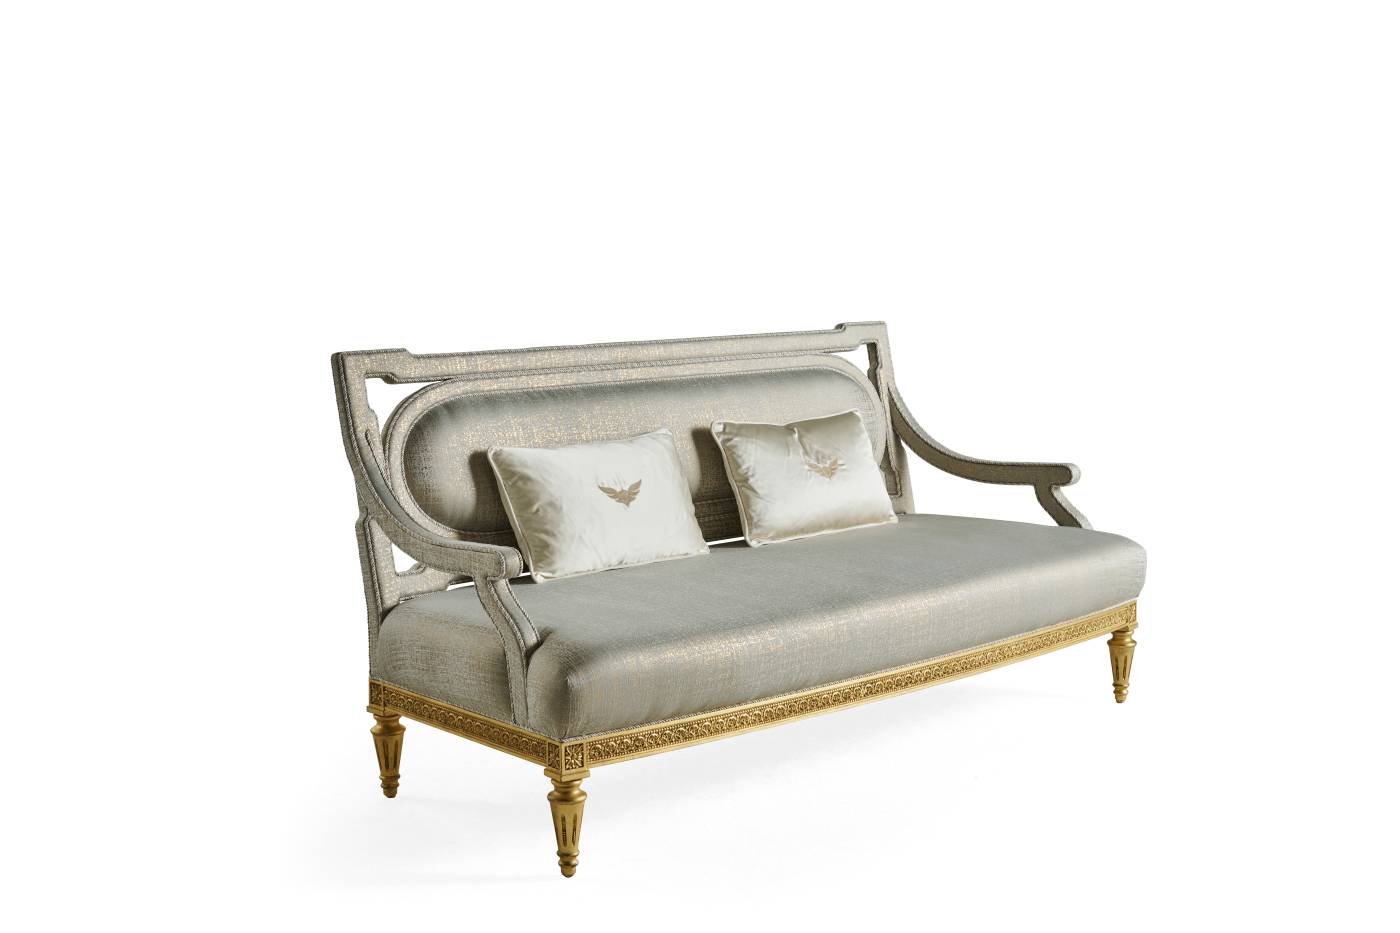 SATIN 2-seater sofa - A luxury experience with the Héritage collection and its classic luxurious furniture